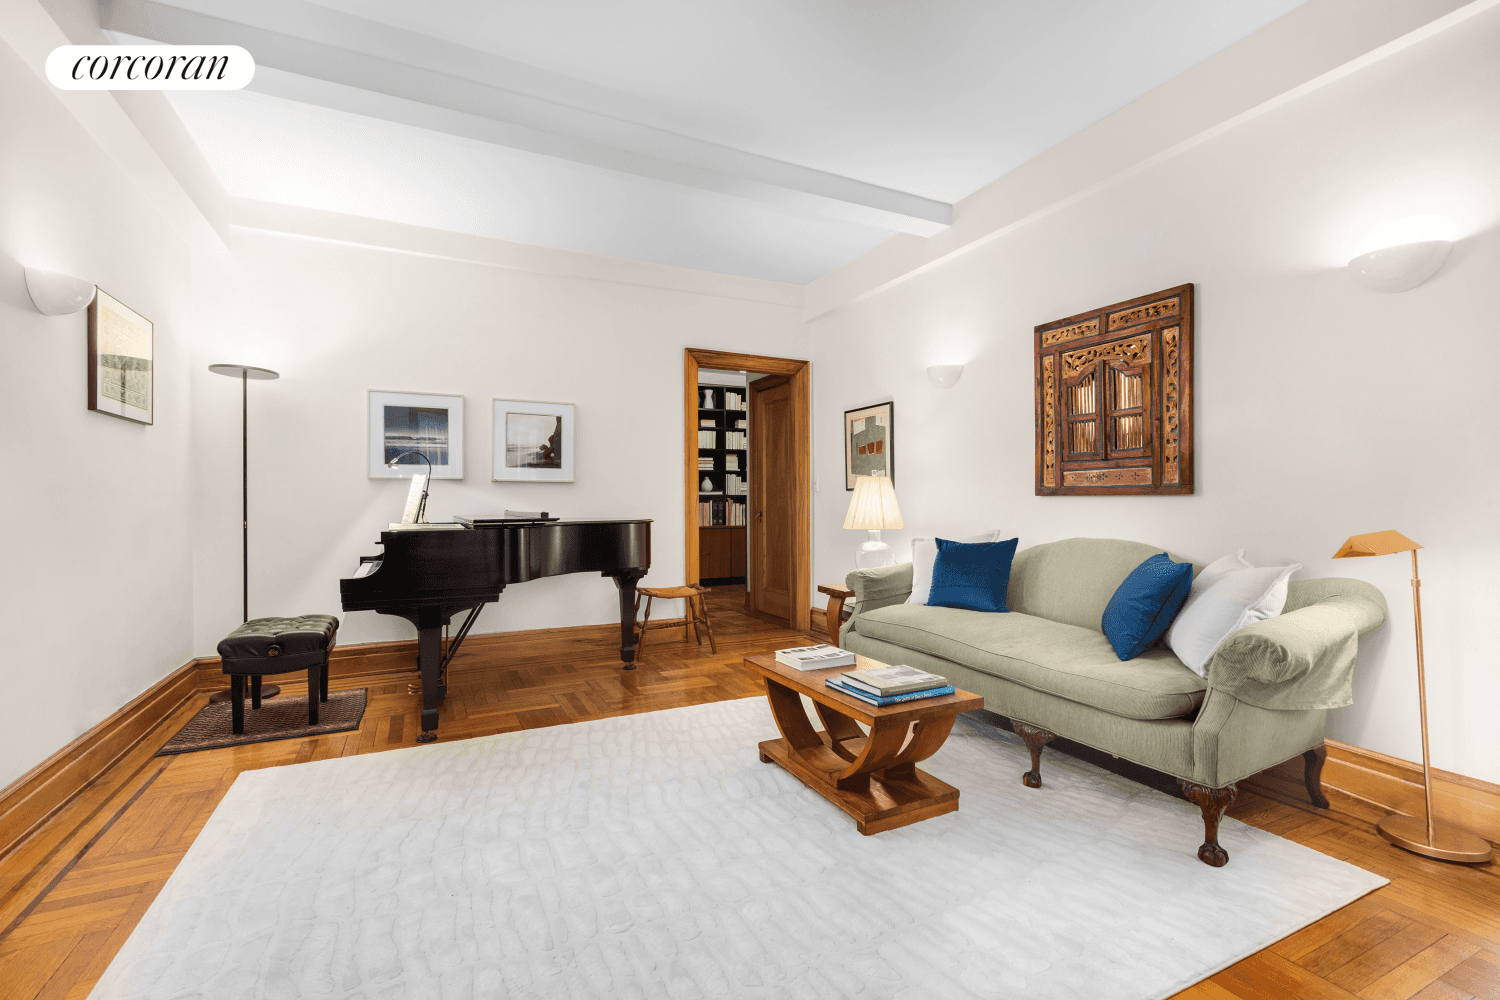 Step into timeless elegance with this charming 2 bedroom, 1 bathroom residence nestled in The Clayton, a historic building dating back to 1922.